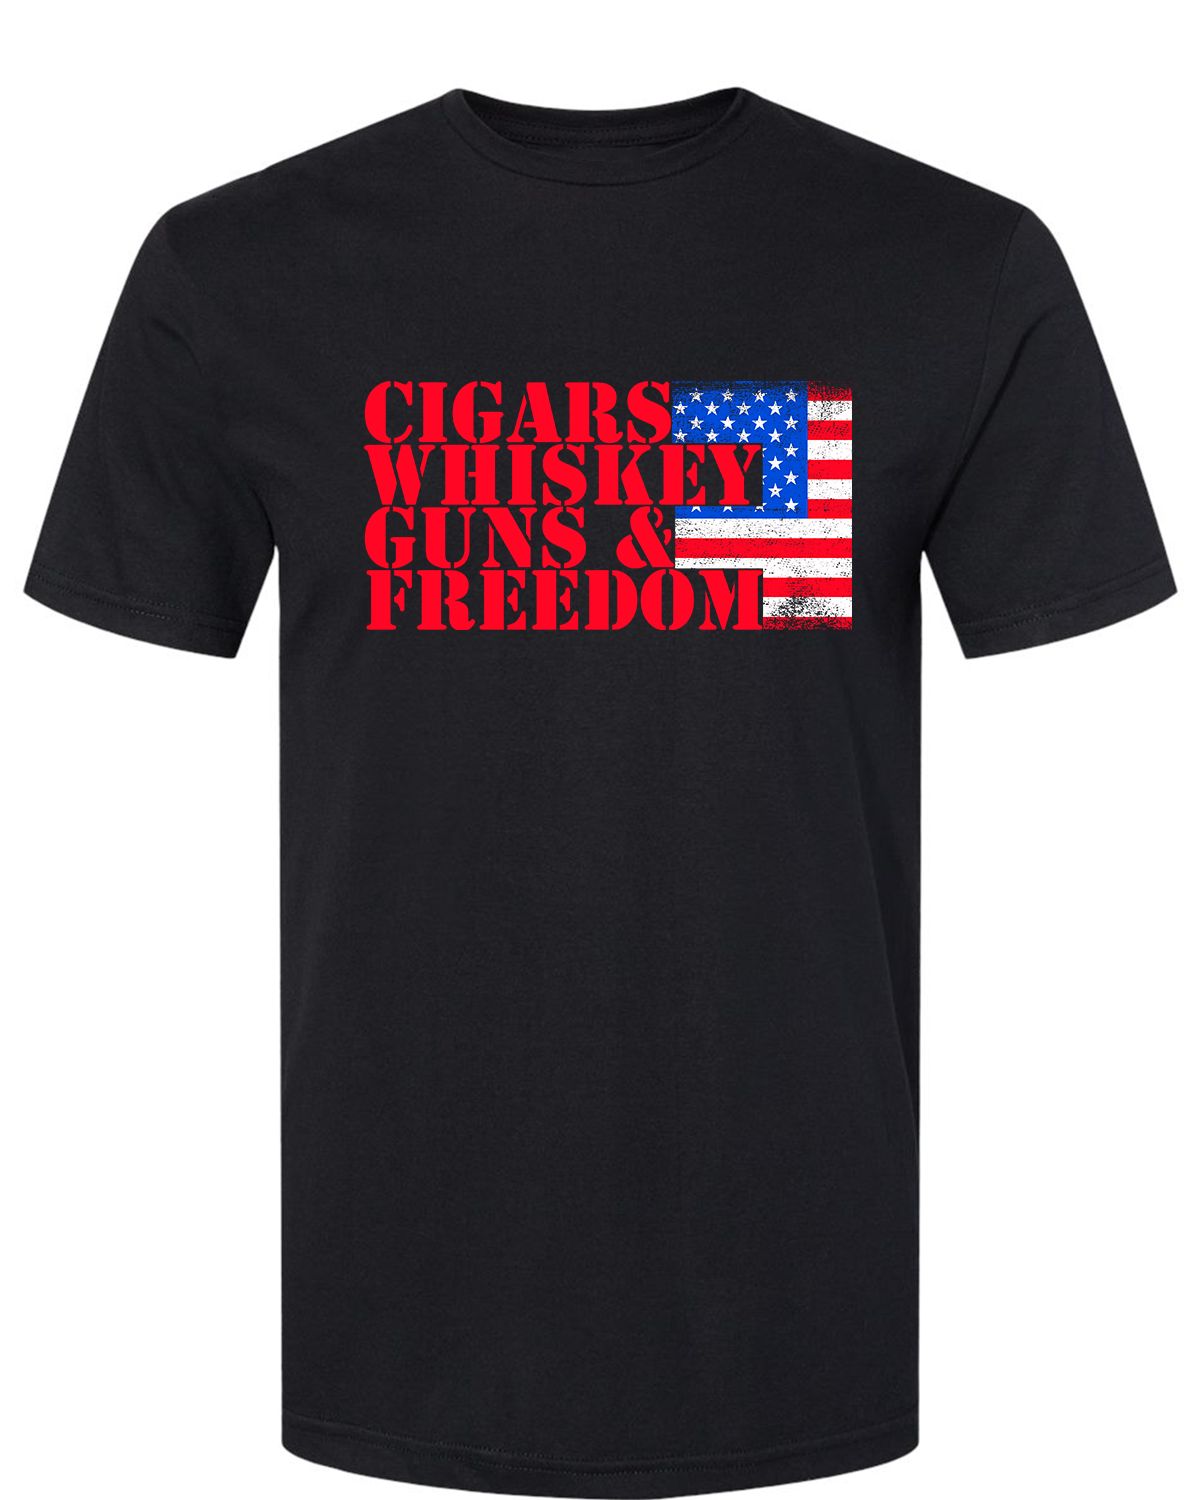 Affordable Custom Hats and Apparel Affordable VQRO Cigars Whiskey Guns & Freedom American Made US Patriotic T-Shirt